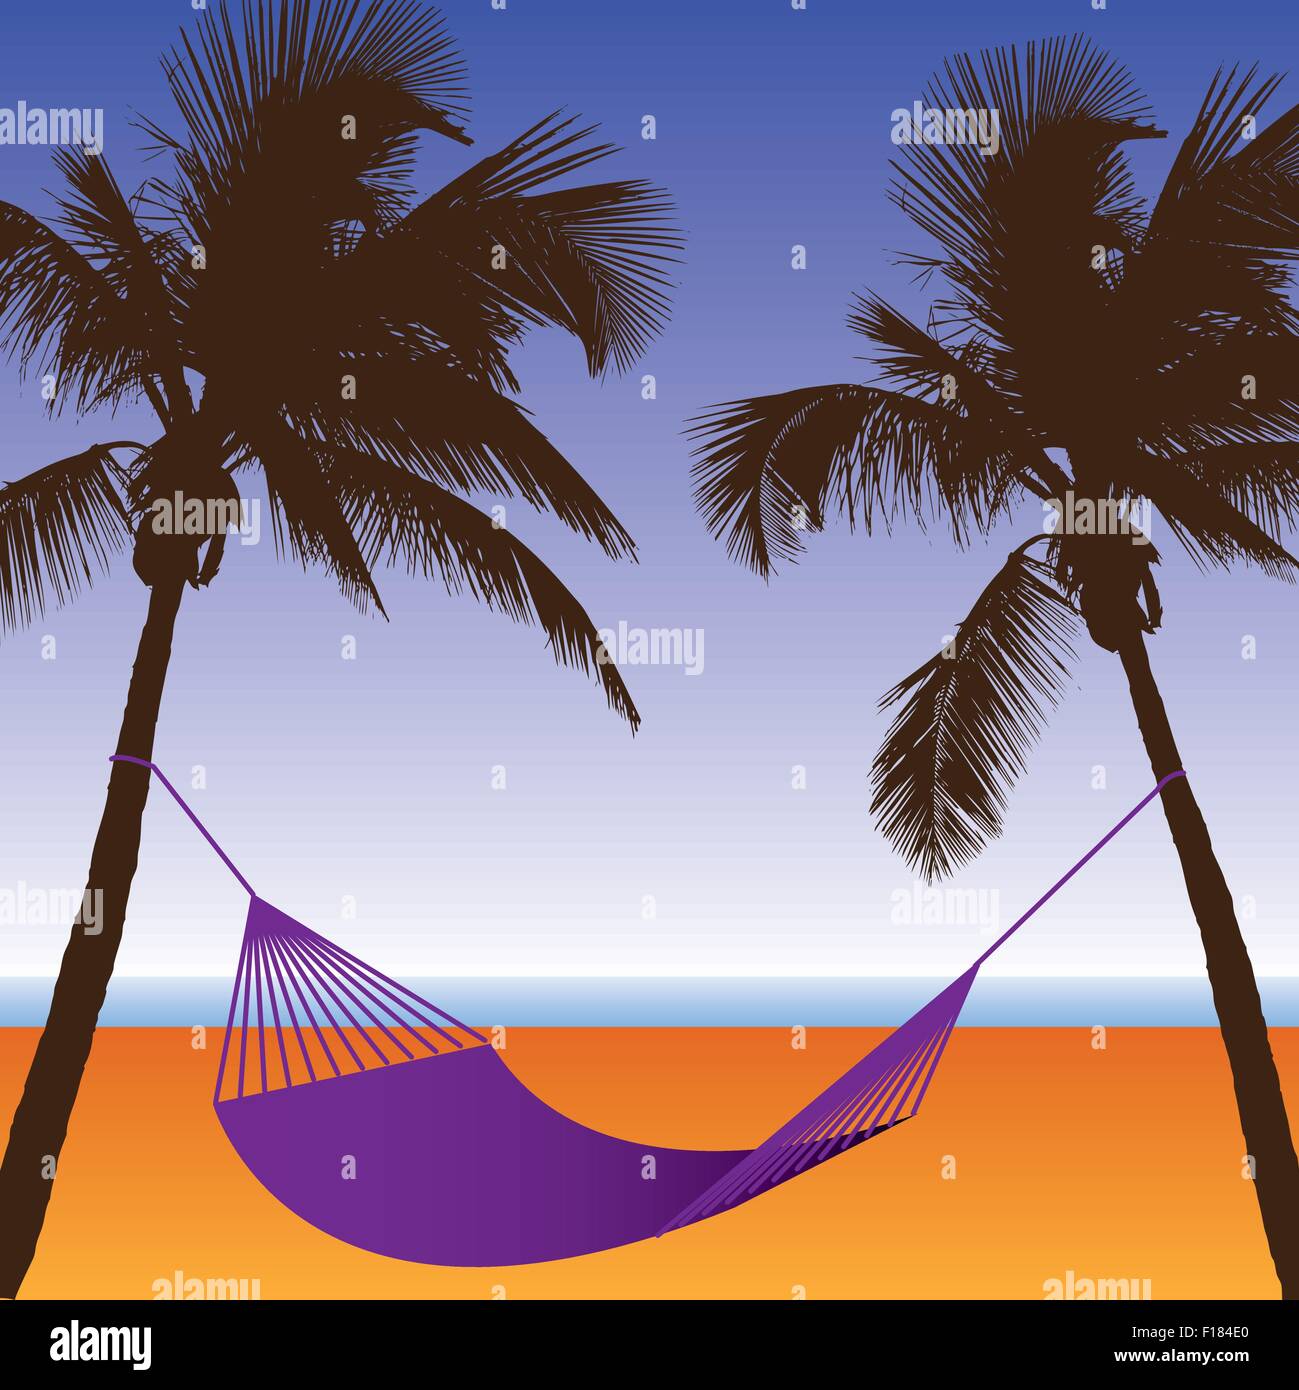 A Palm Tree and Hammock Beach Scene for Print or Web Stock Vector